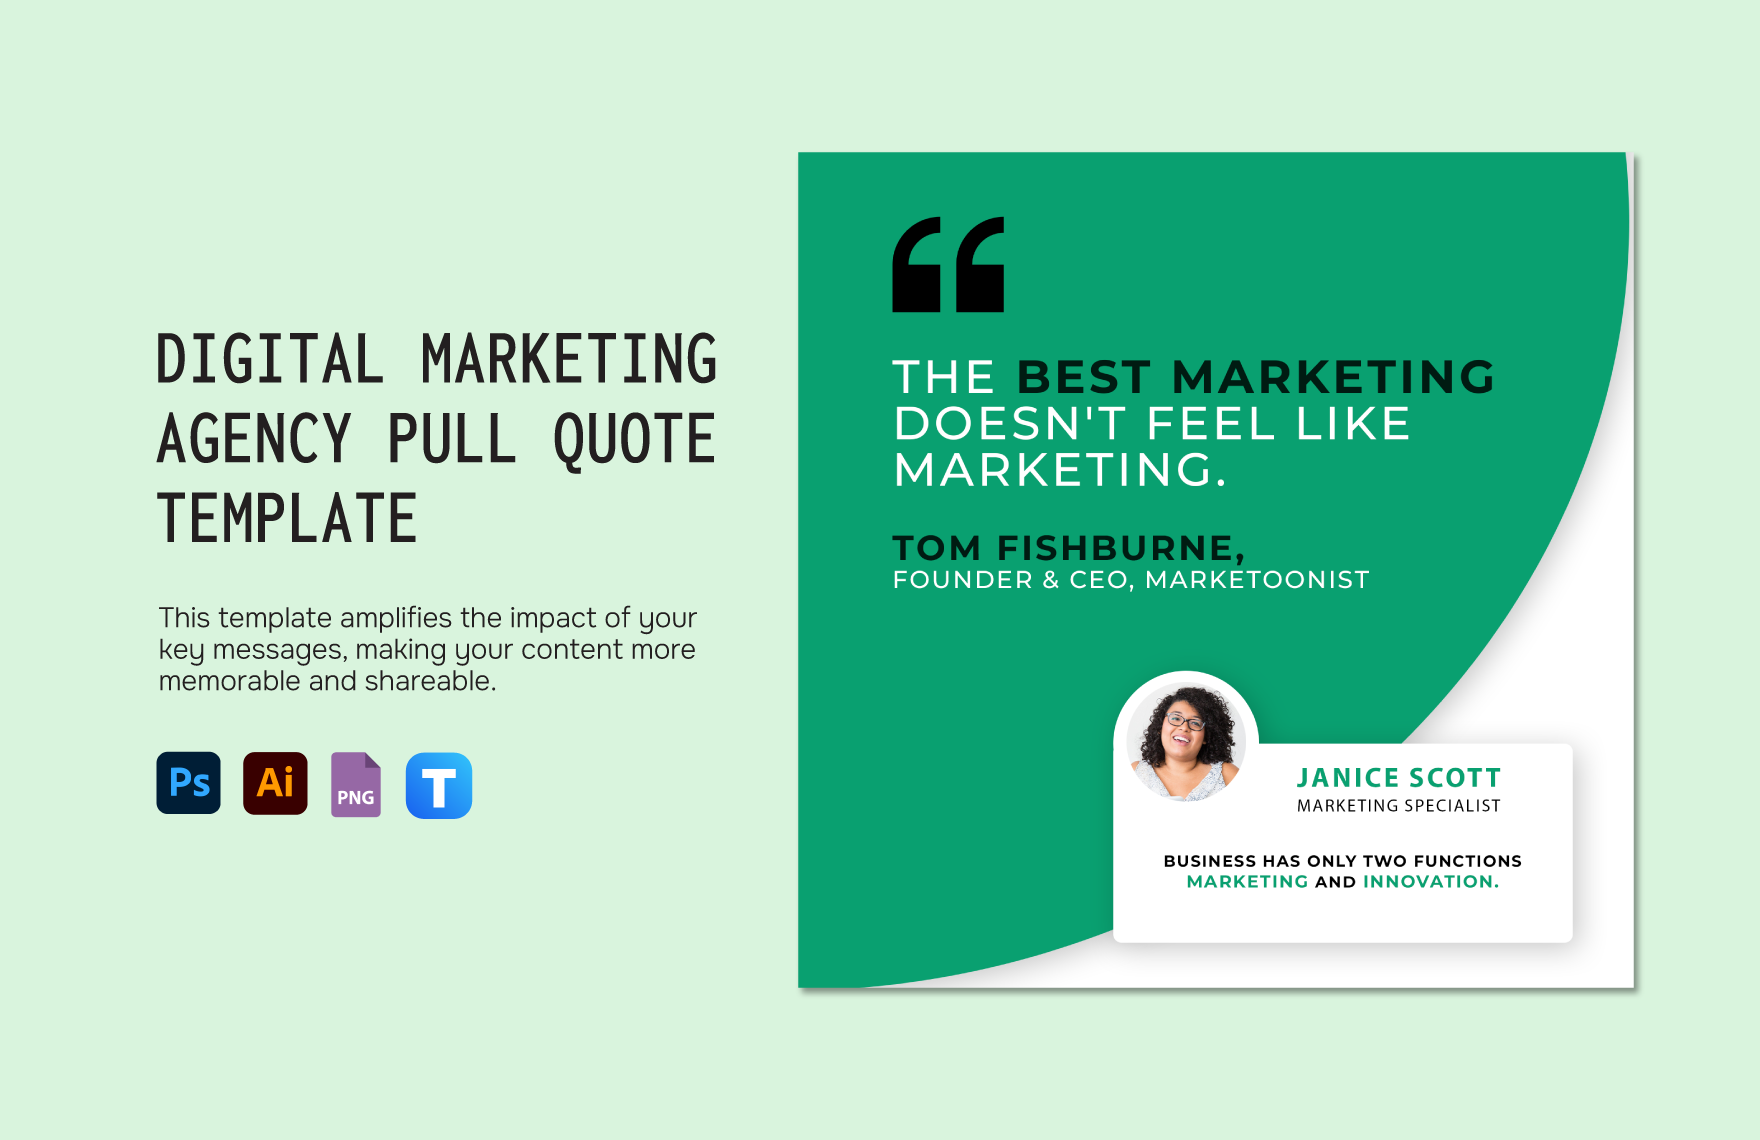 Digital Marketing Agency Pull Quote Template